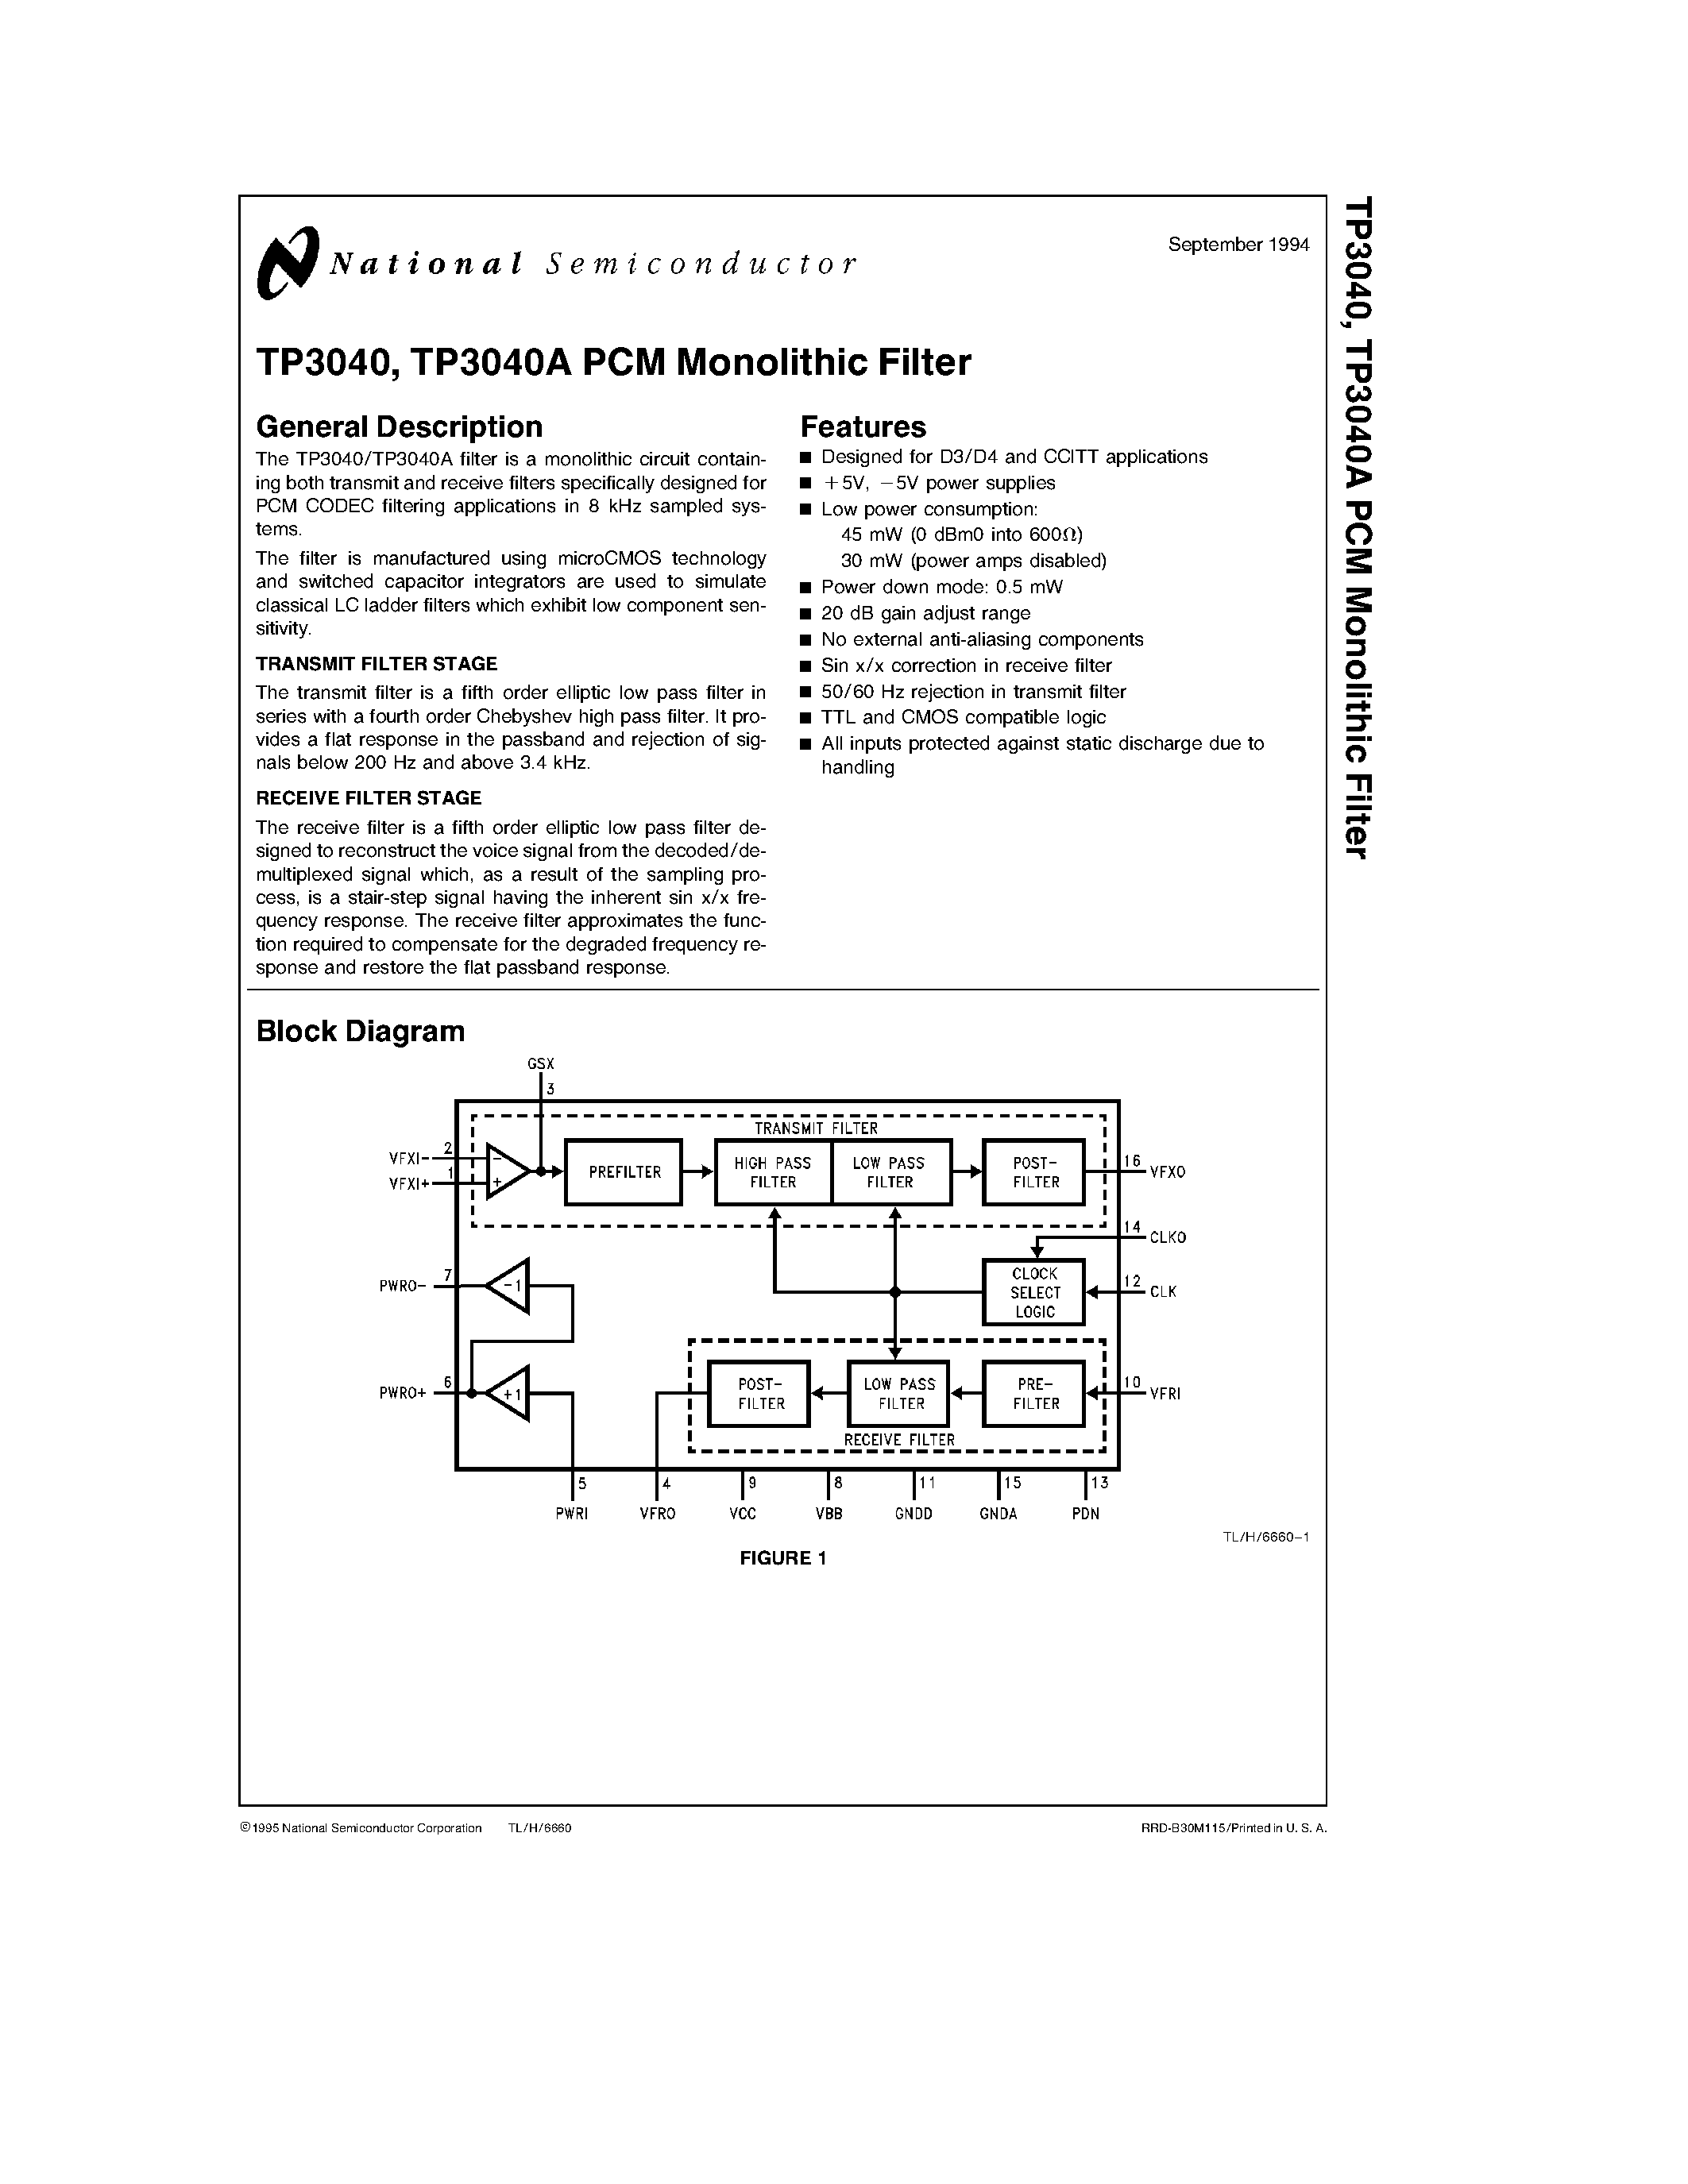 Datasheet TP3040AN - TP3040/ TP3040A PCM Monolithic Filter page 1